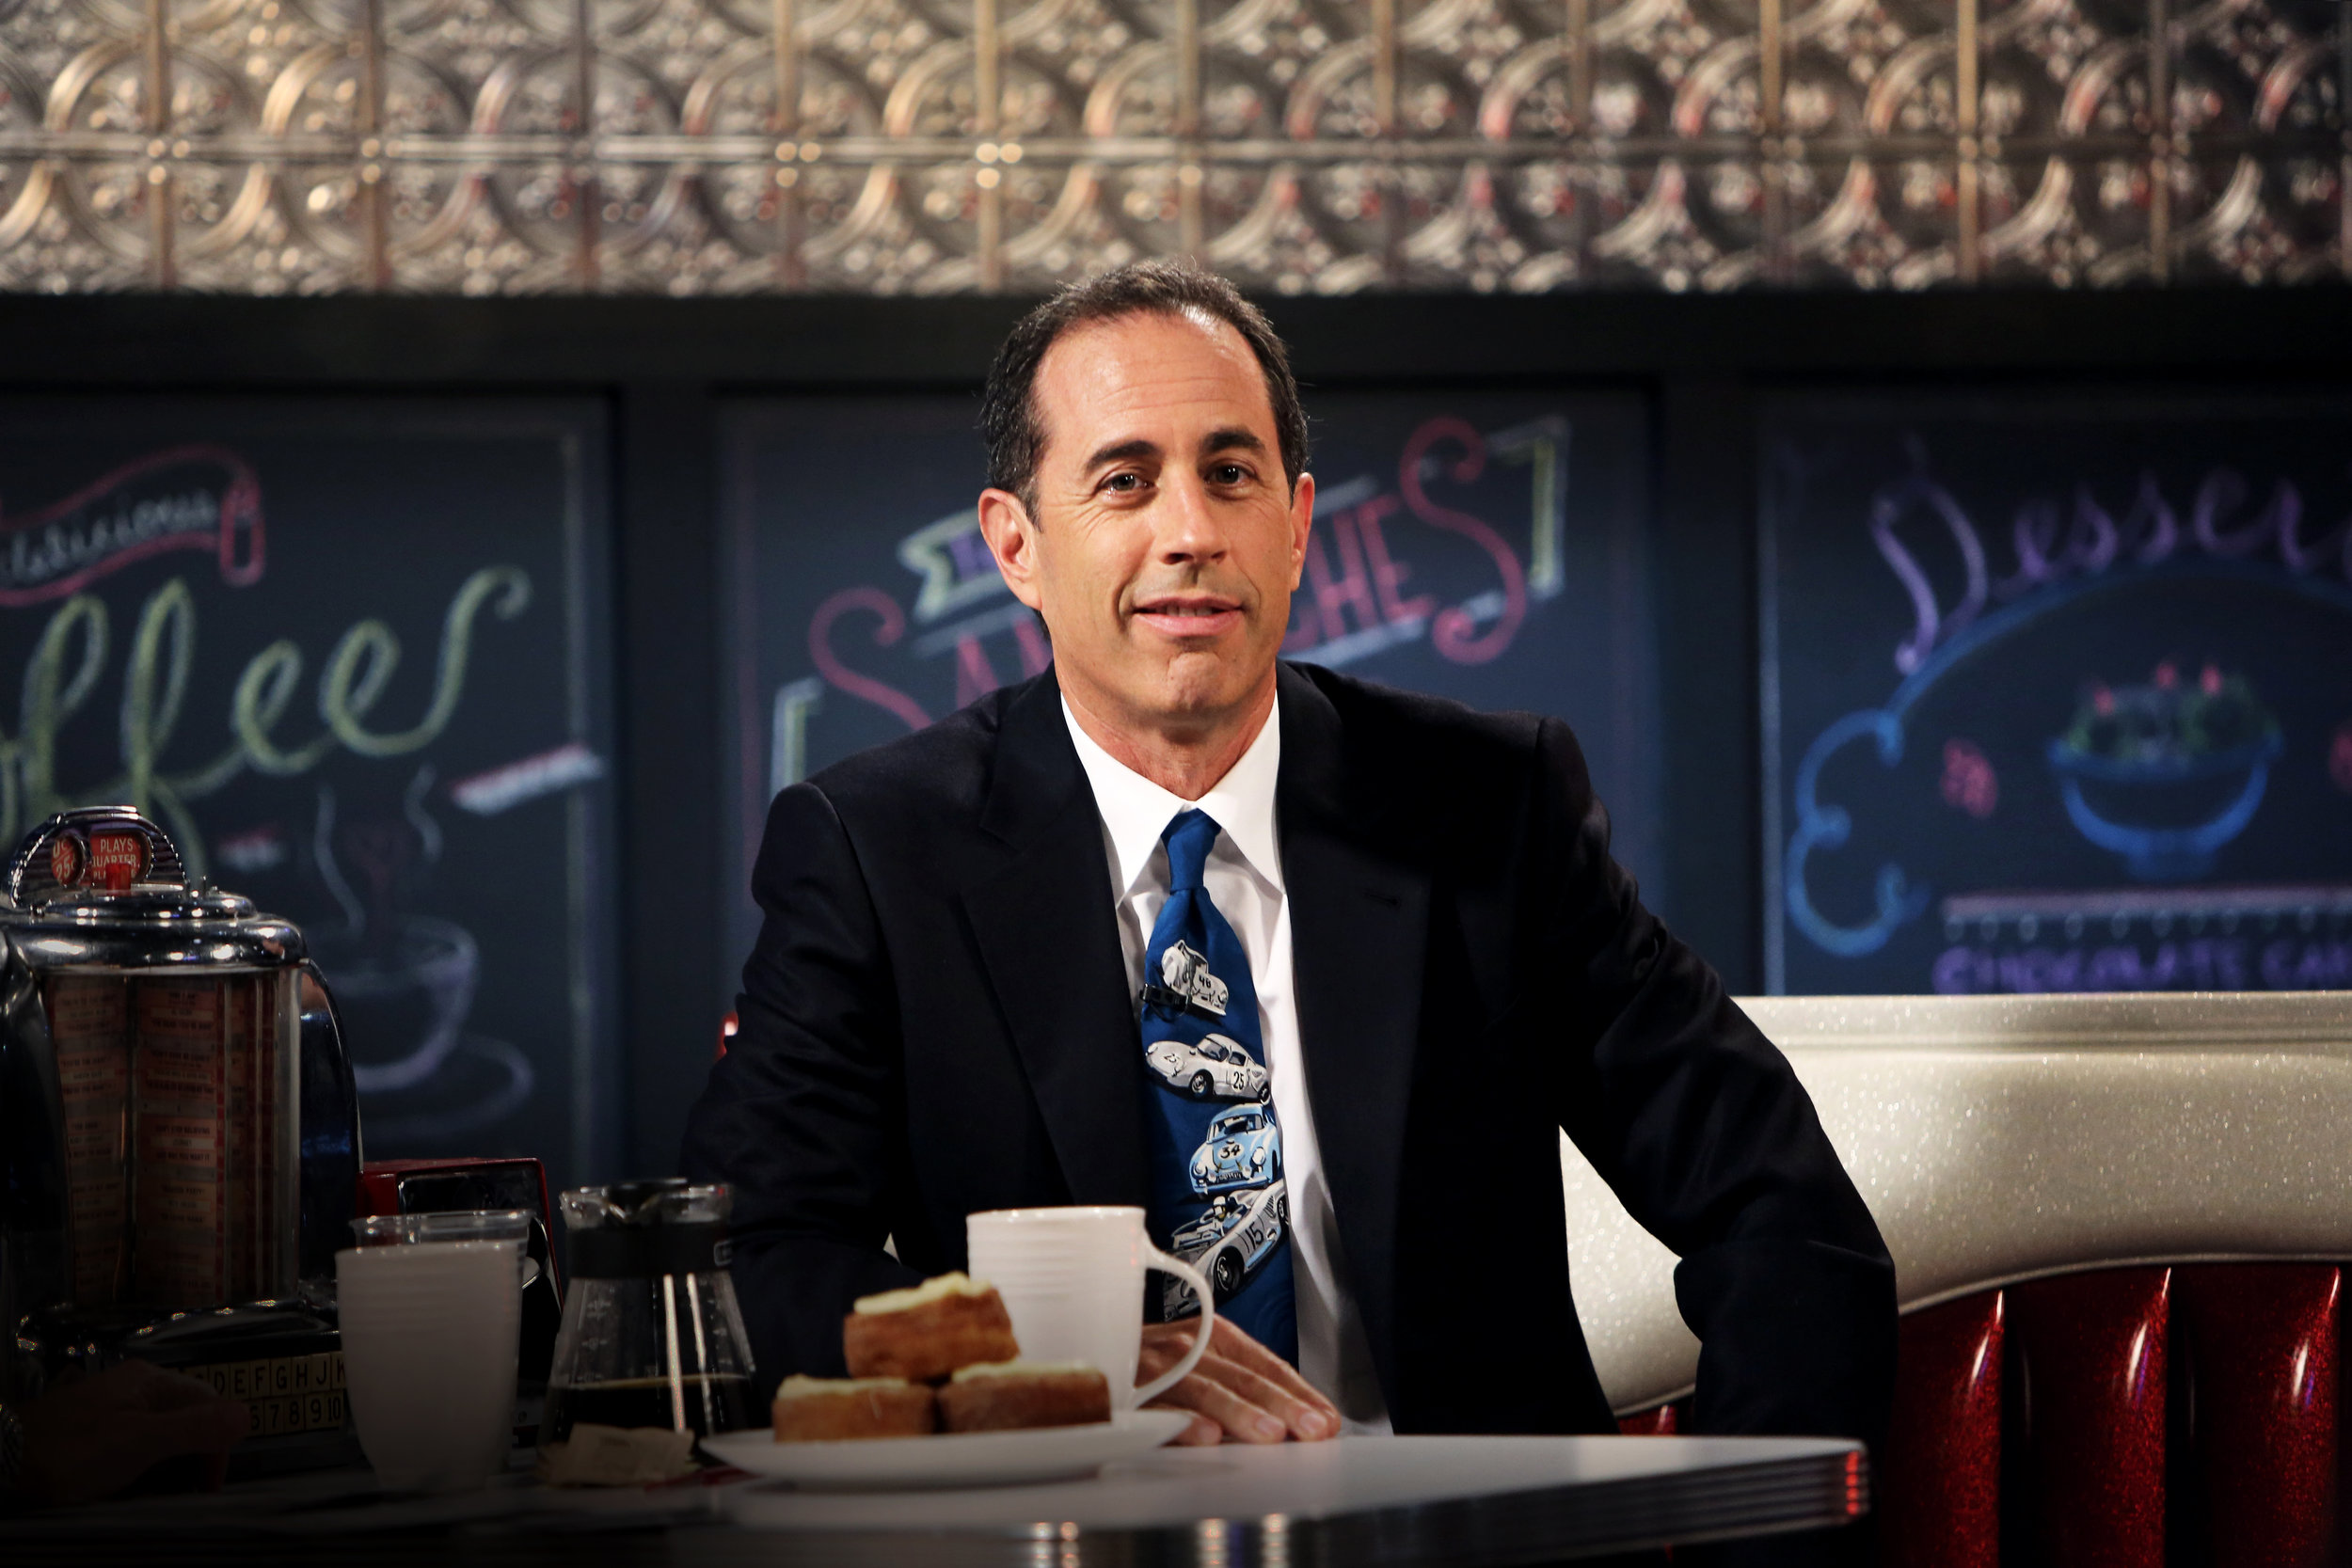 Jerry Seinfeld <br />Stand-up comedian, Actor